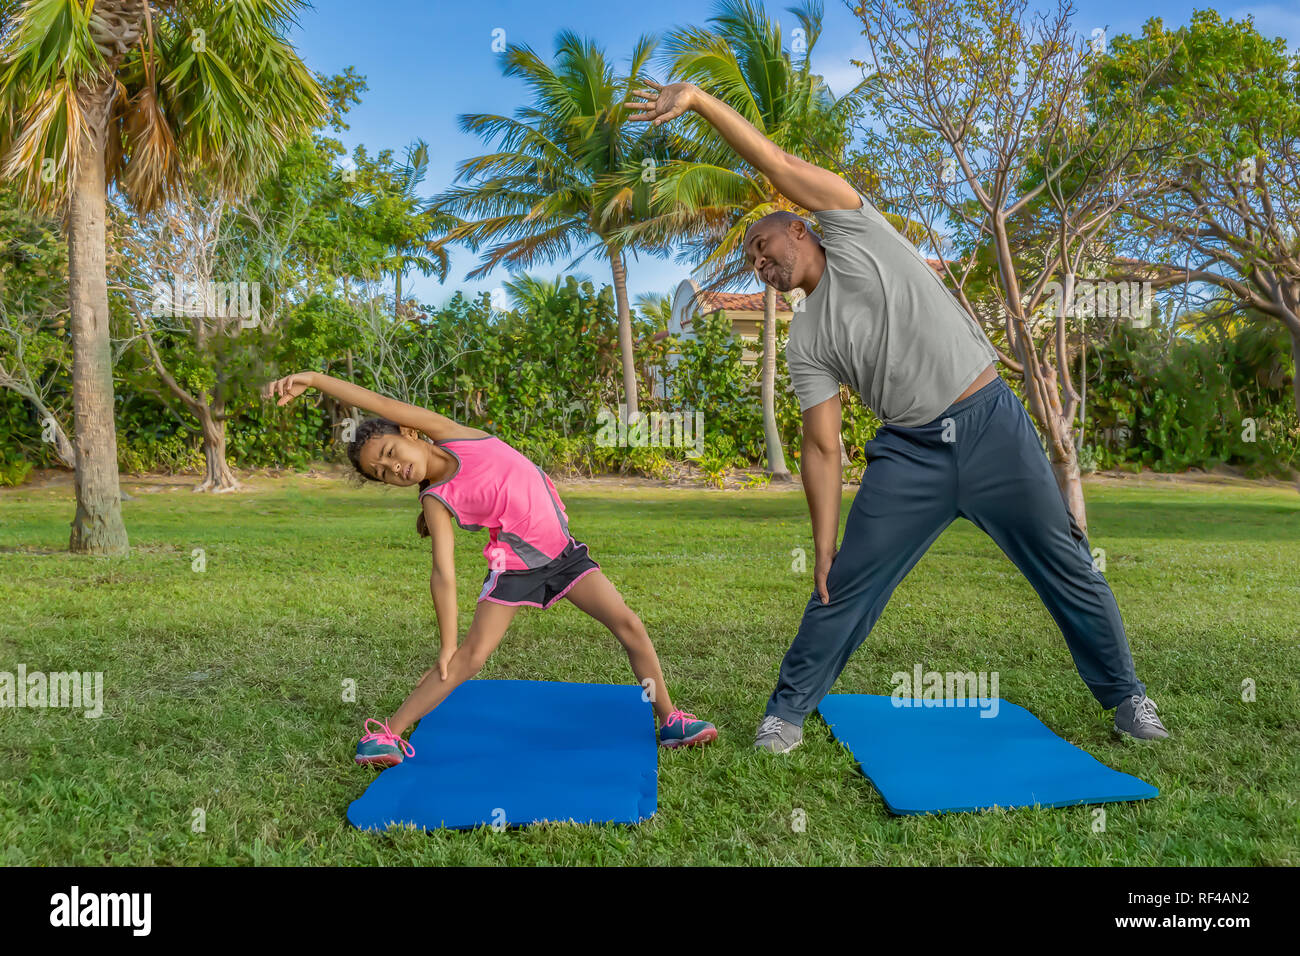 Father and daughter the importance of side stretching as part morning exercise. The little girl struggles to reach as far as daddy. Stock Photo